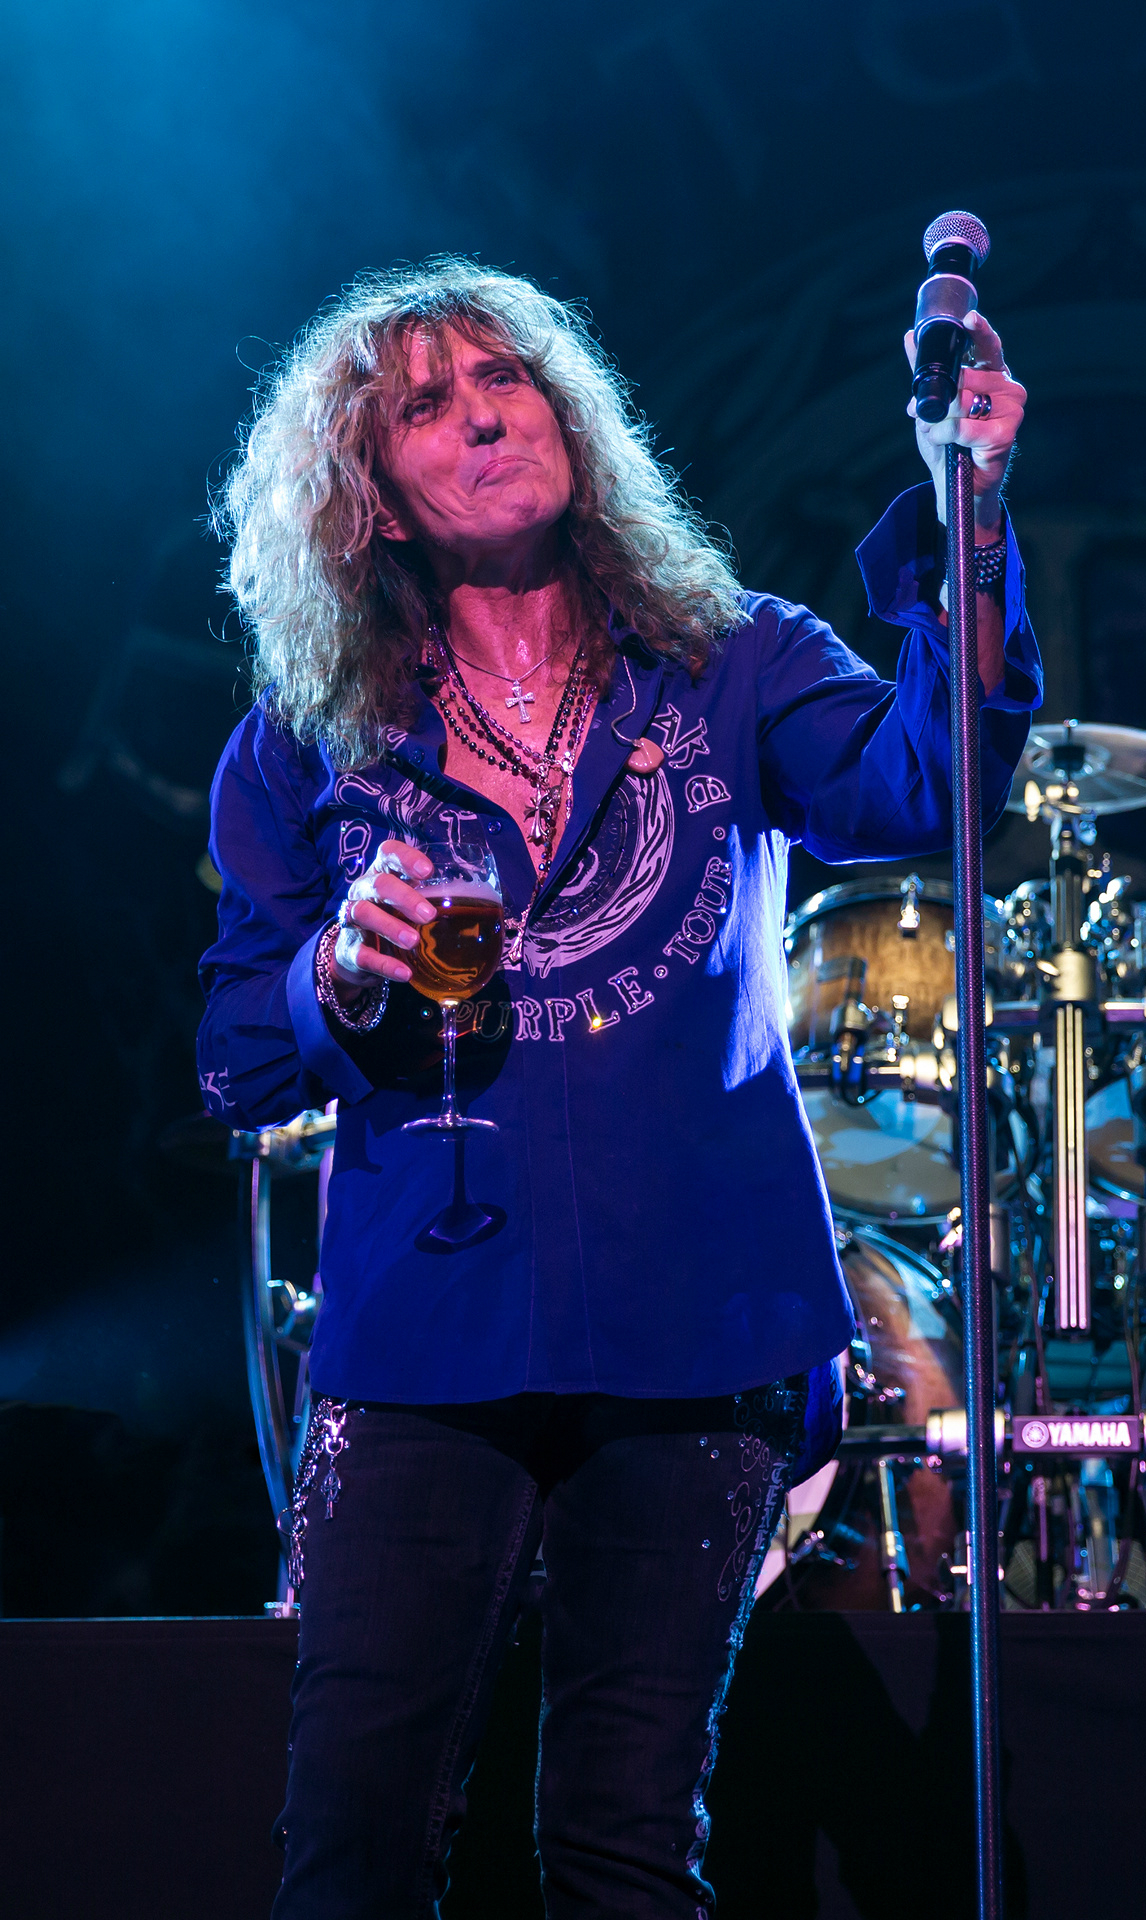 Coverdale in 2015